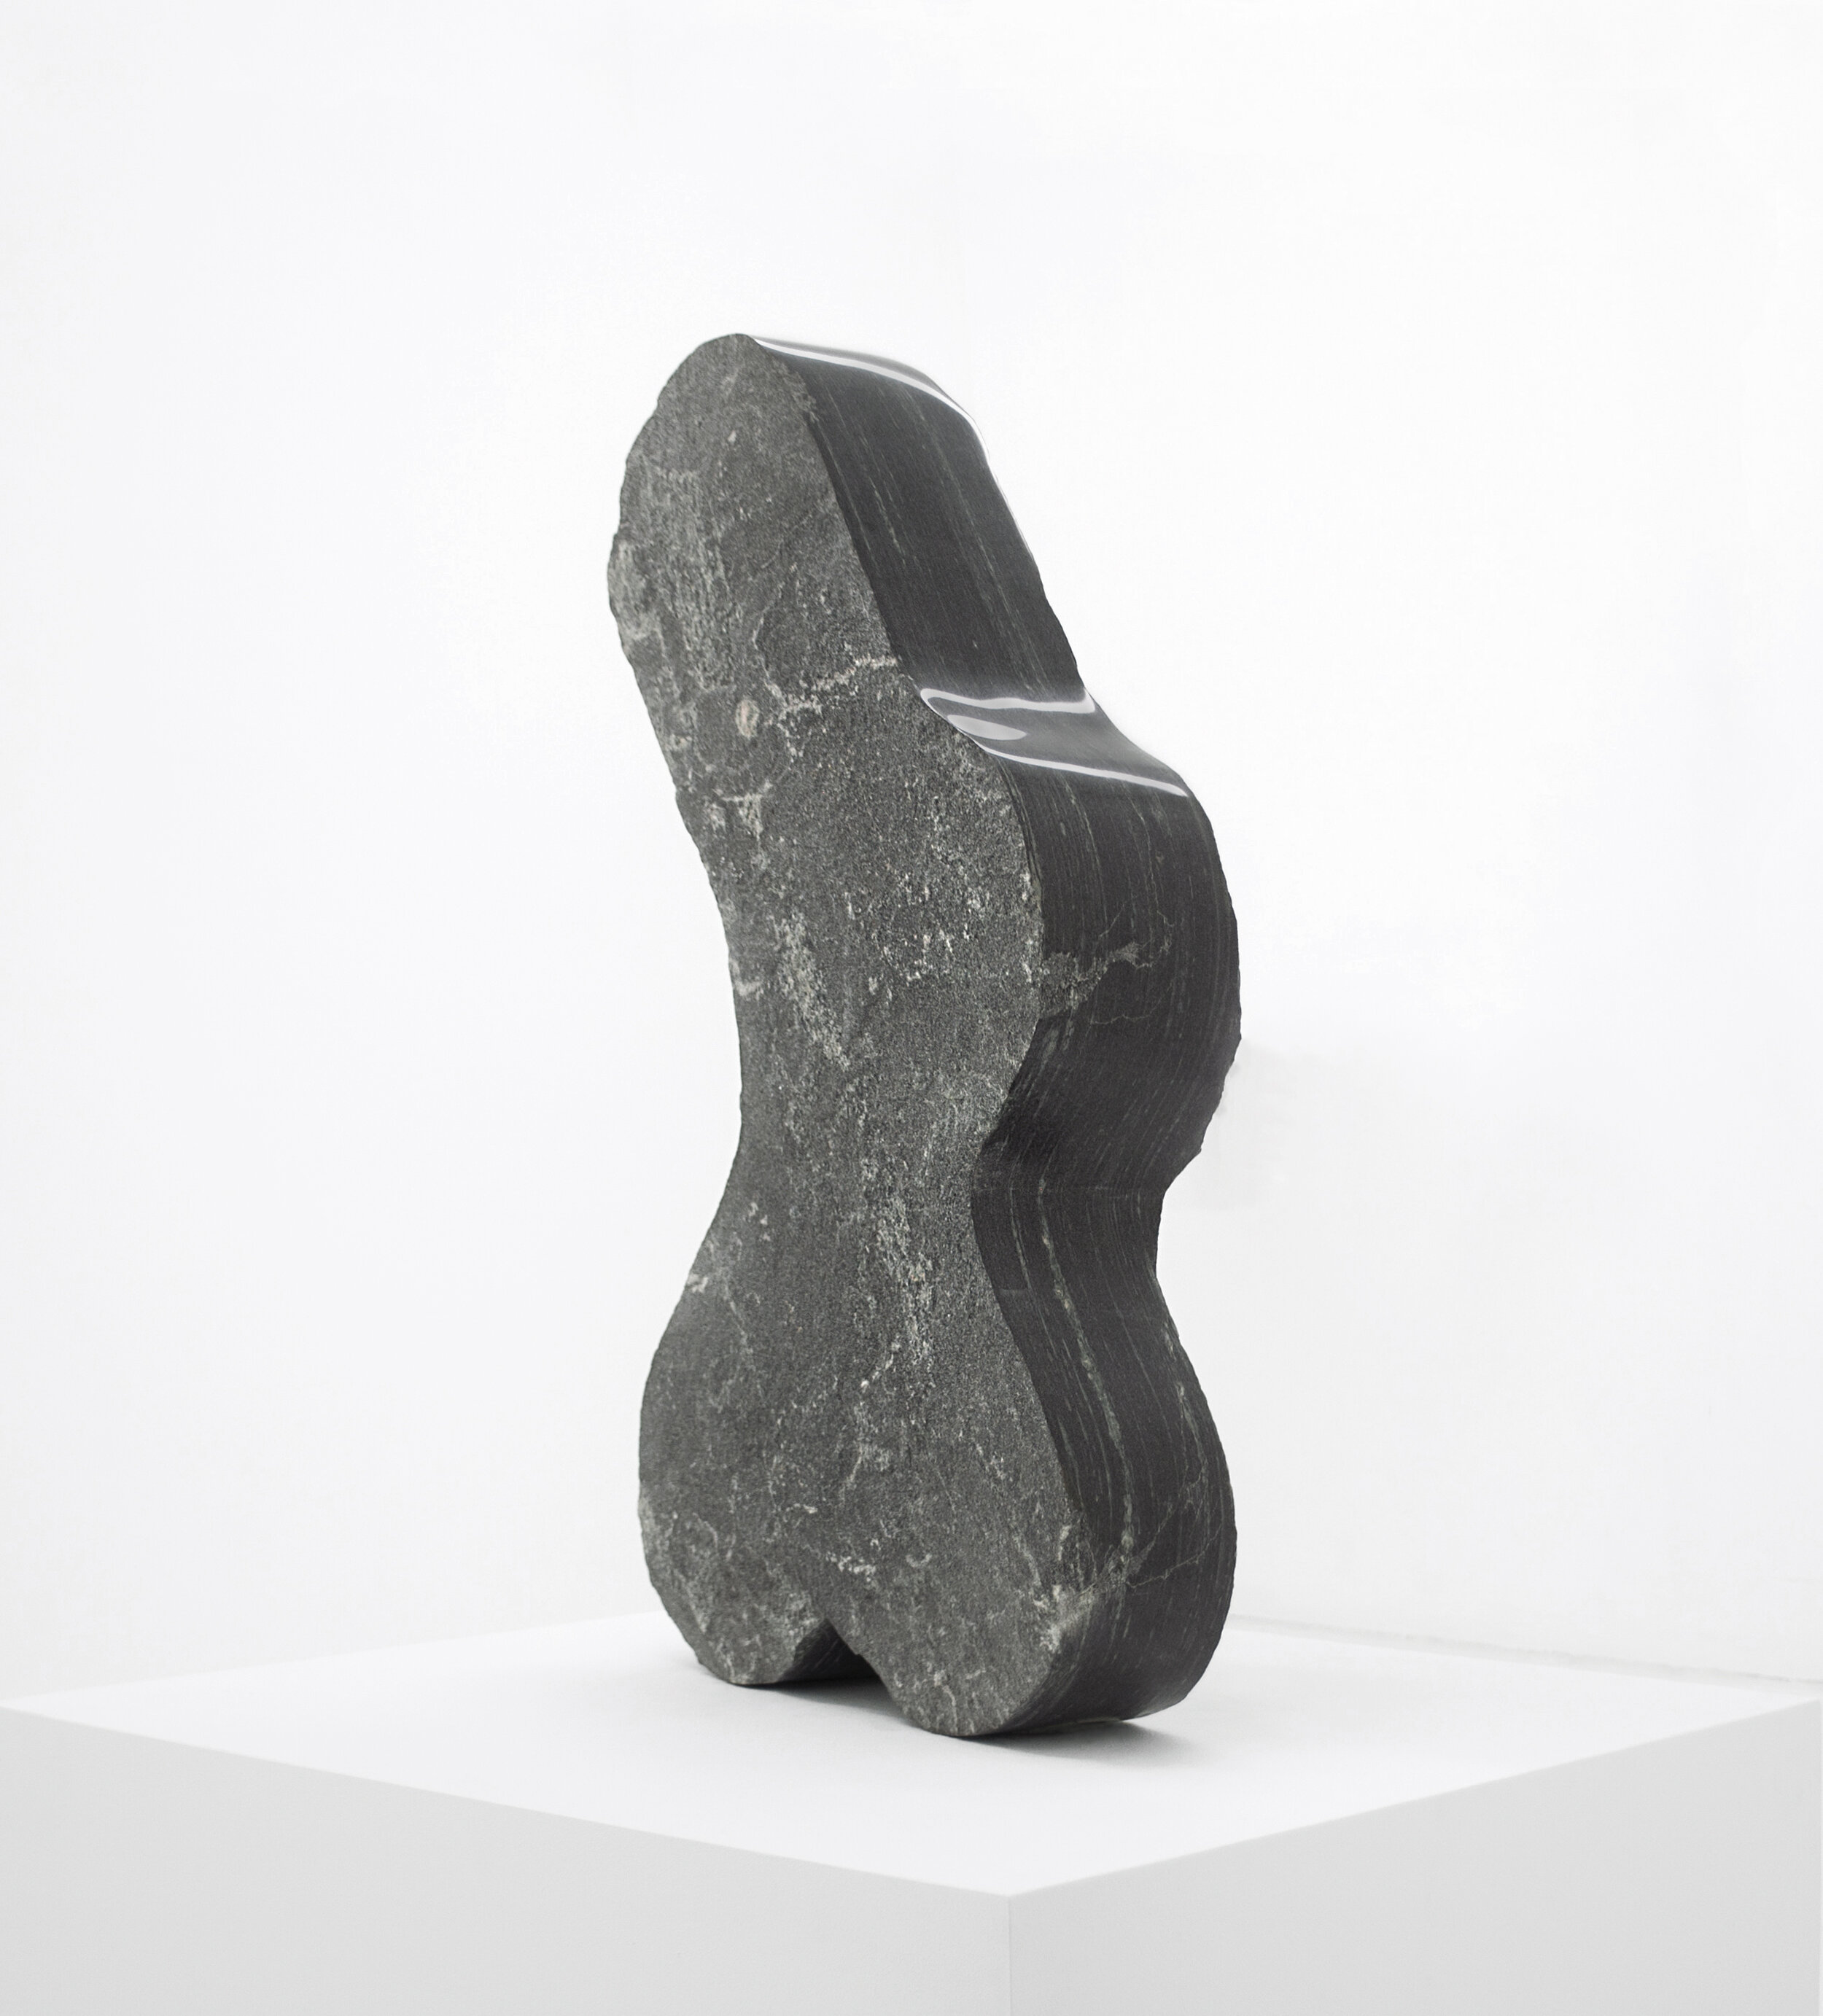   Goiter (back) , 2018, Granite (Courtesy the artist and LAUNCH F18) 